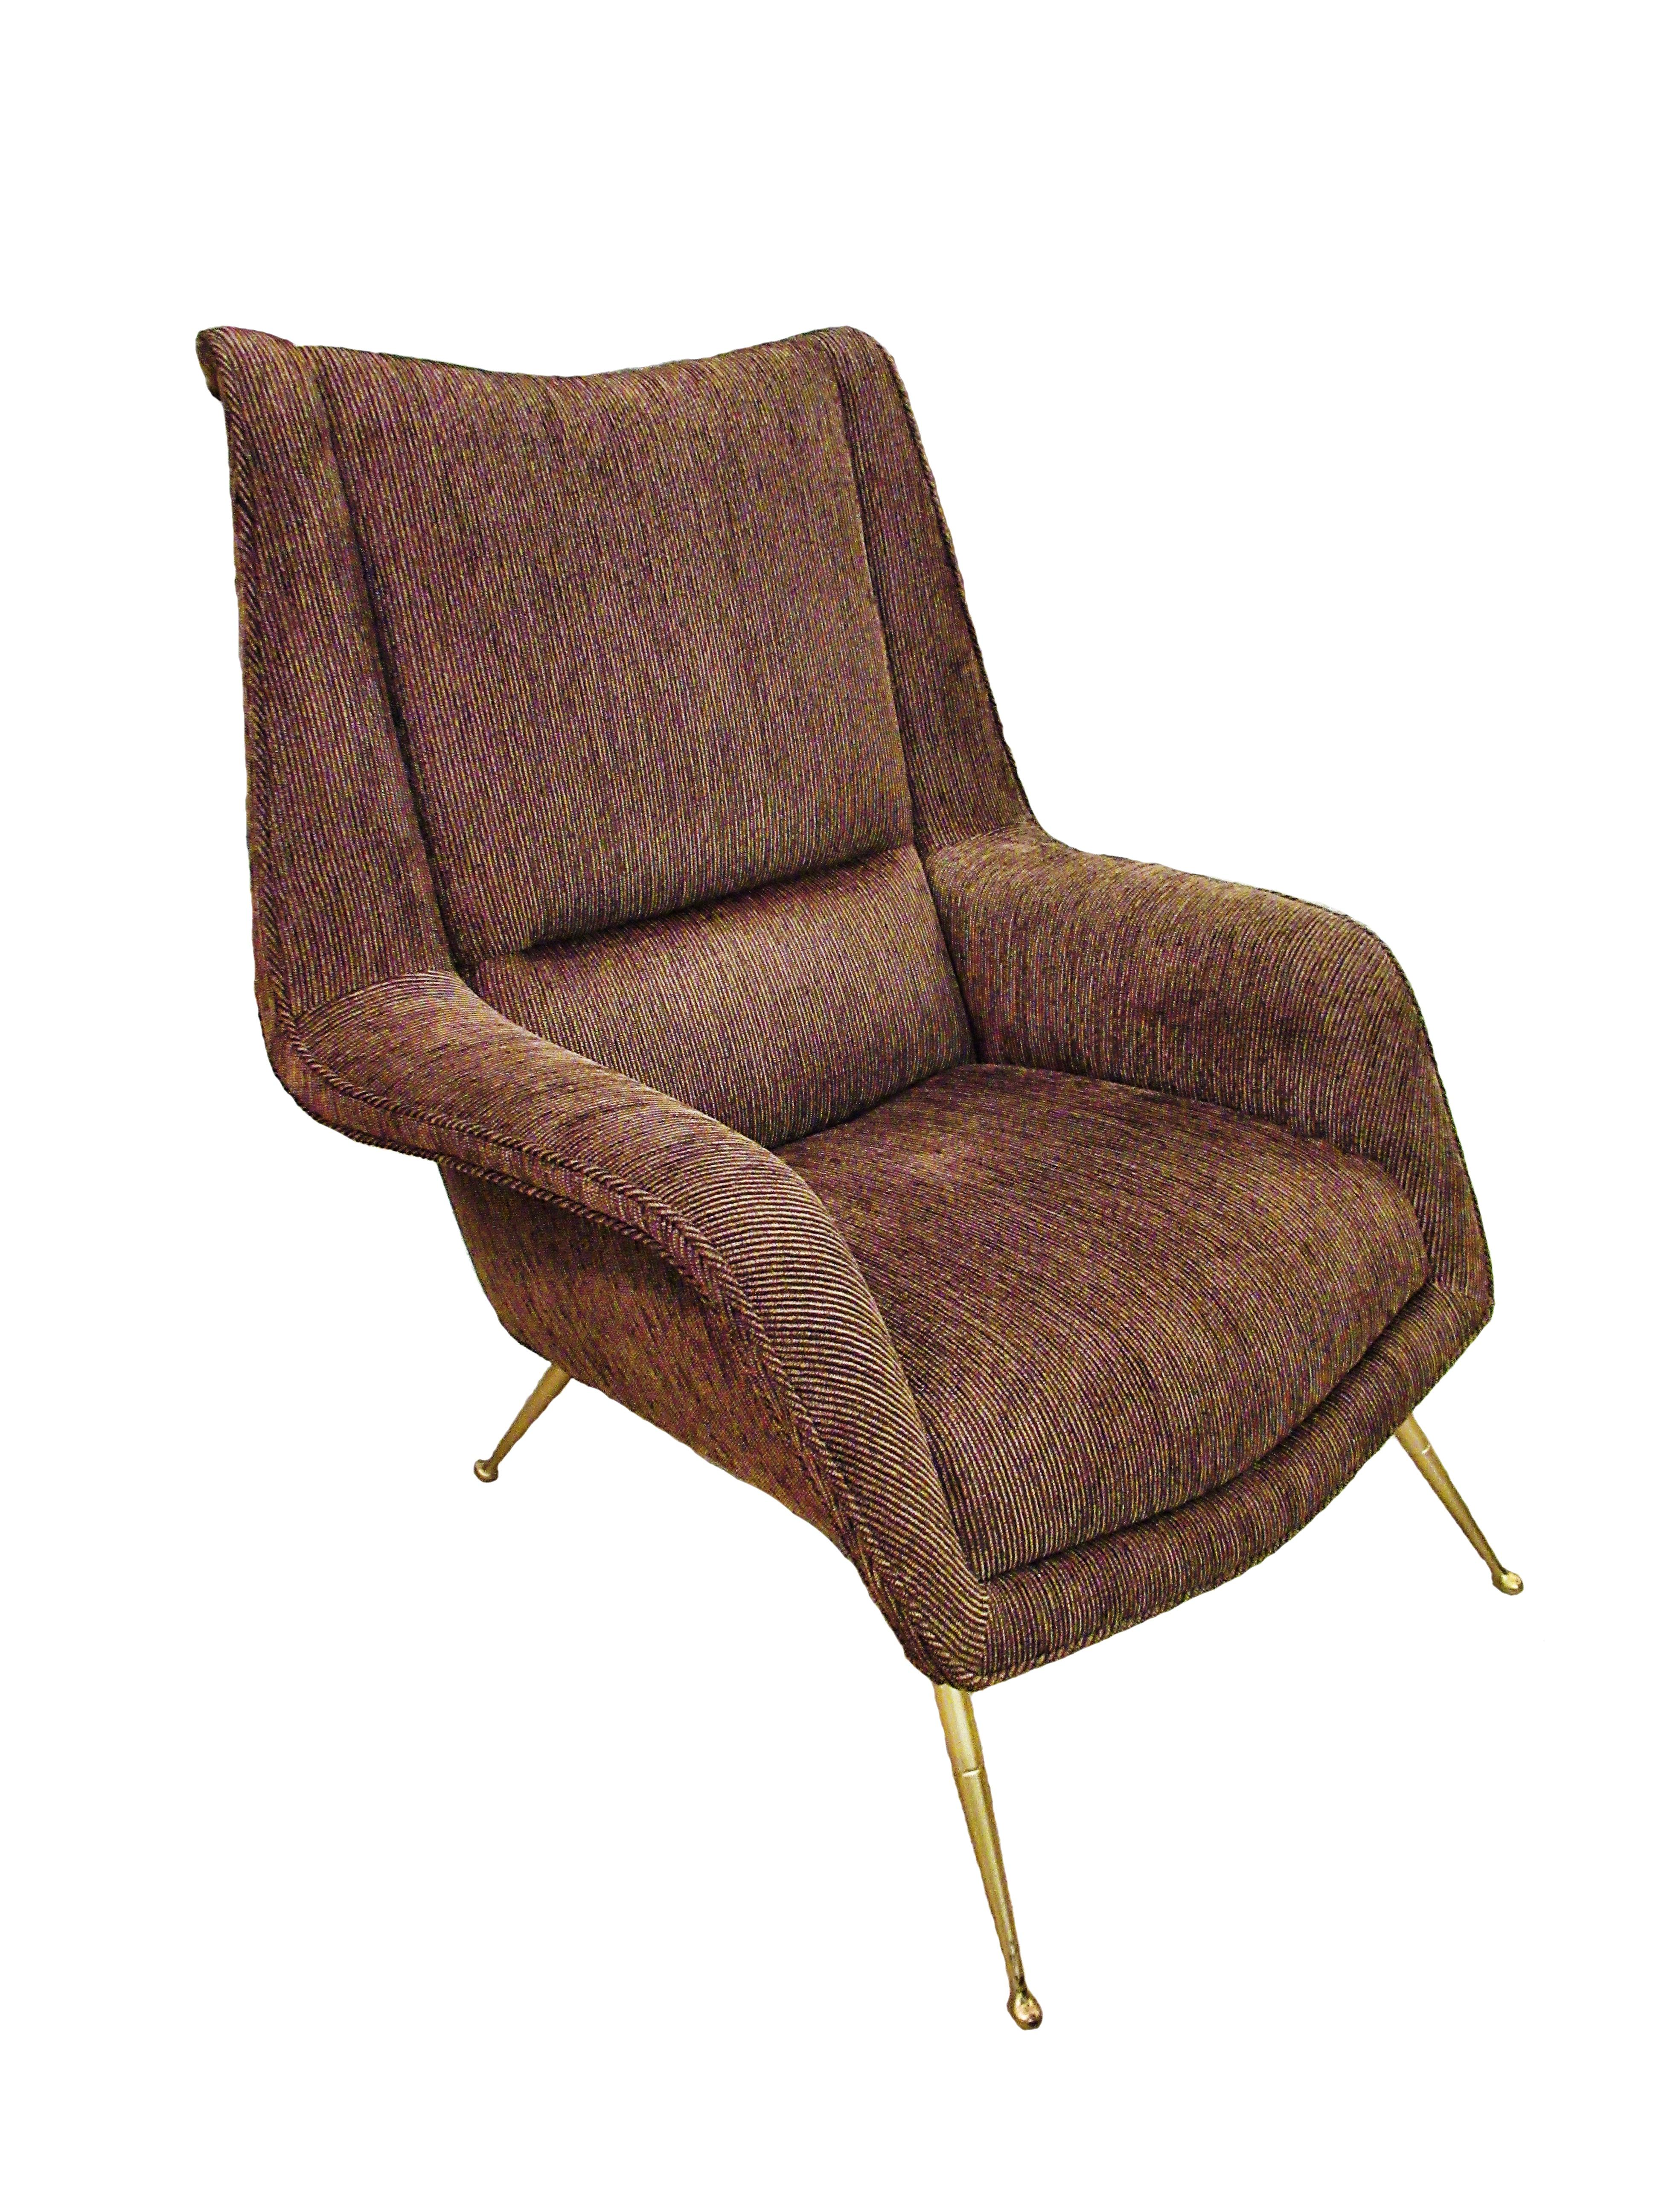 The fully upholstered frame with splayed legs.